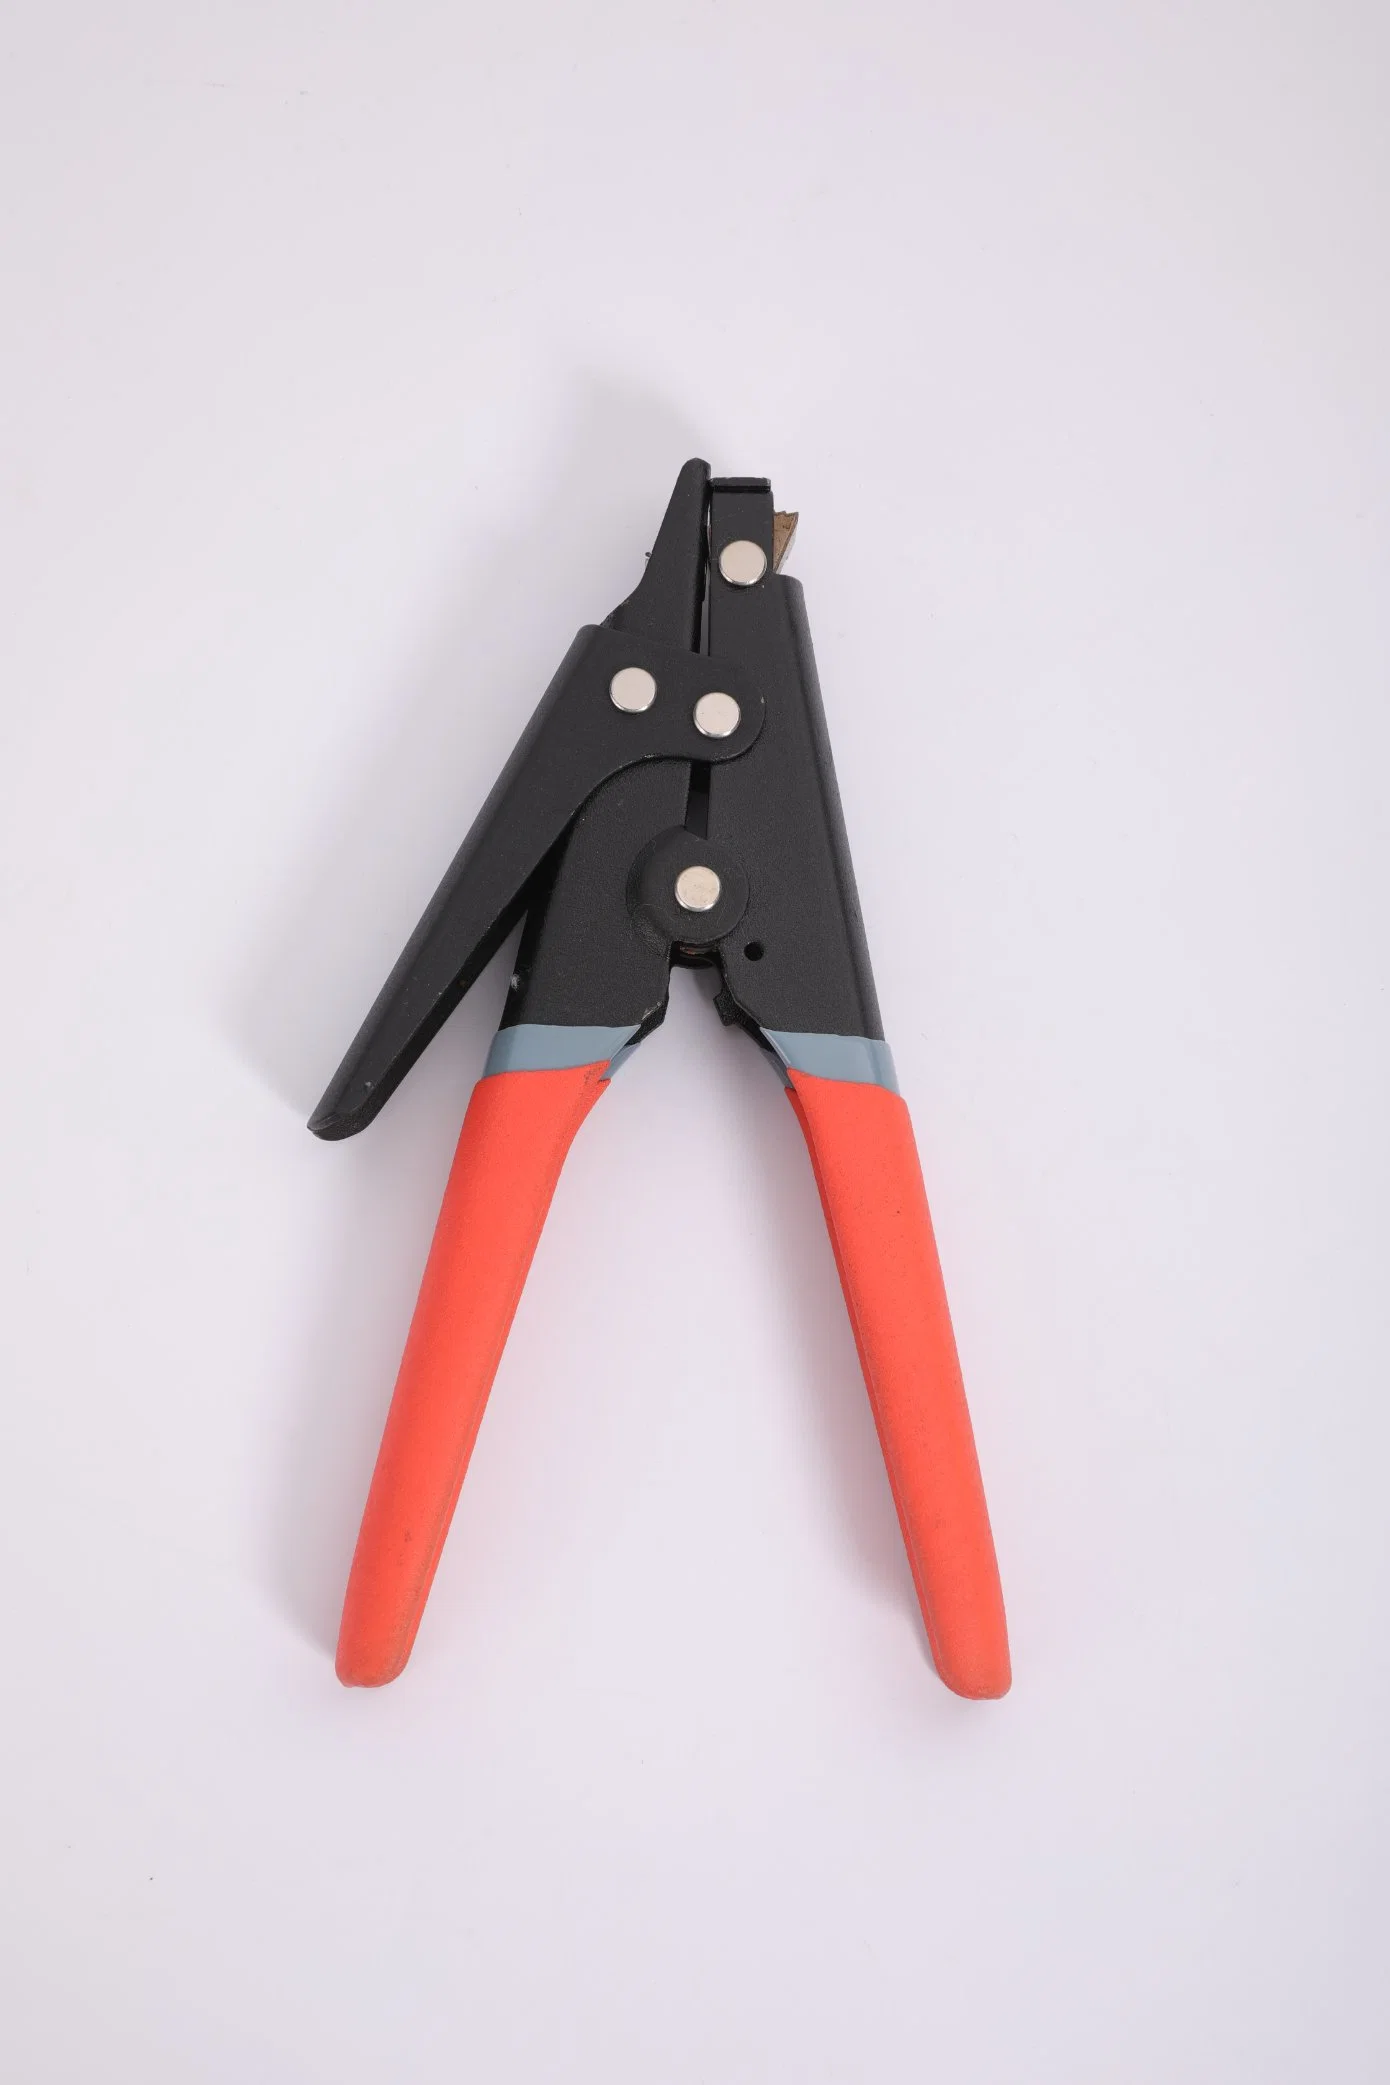 Manual Cut-off Tie Tool Cable Tie Gun and Tensioning and Cutting Tool for Plastic Nylon Cable Tie or Fasteners